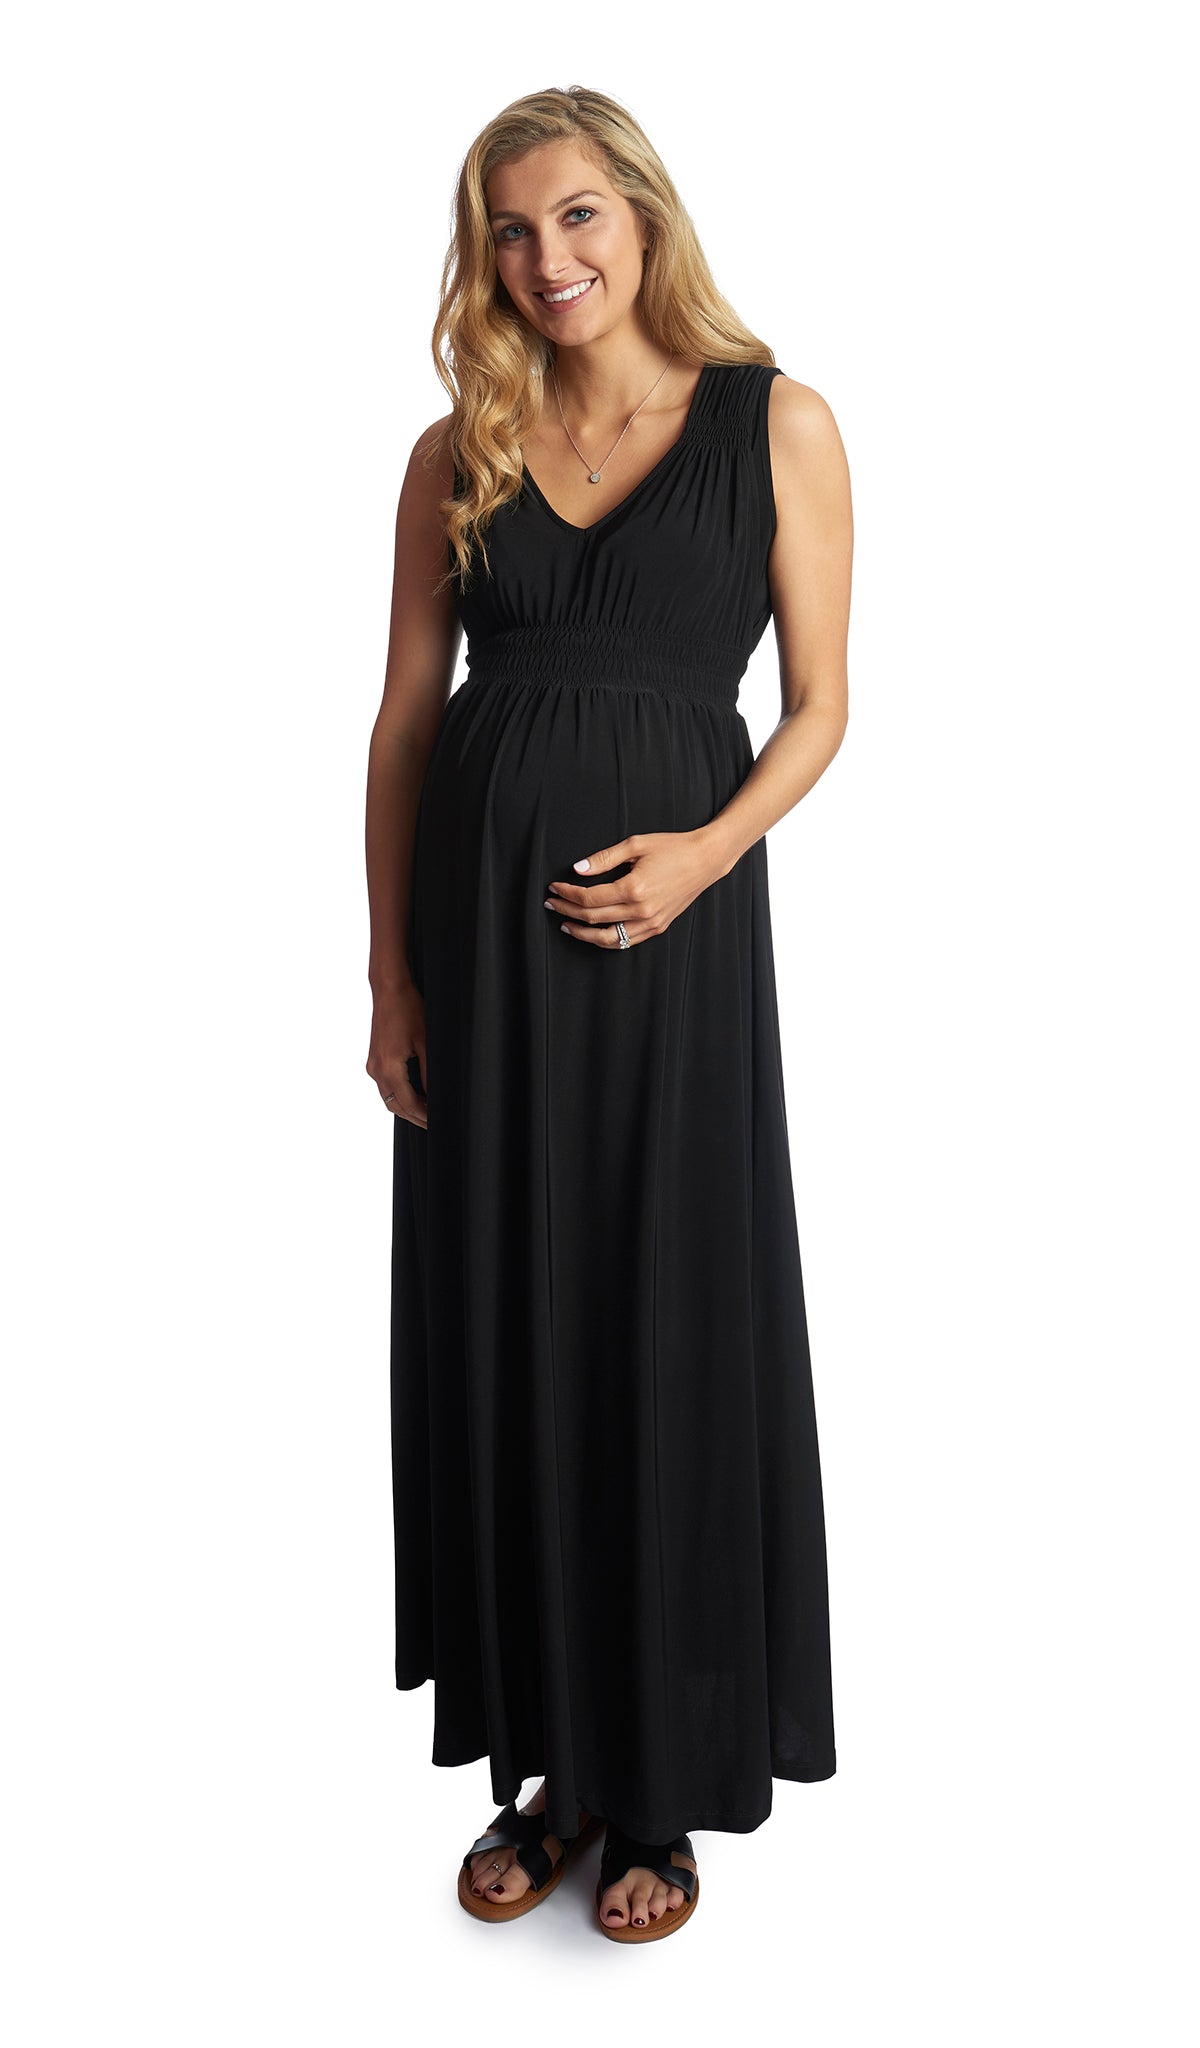 Black Valeria dress worn by pregnant woman with one hand on her belly.